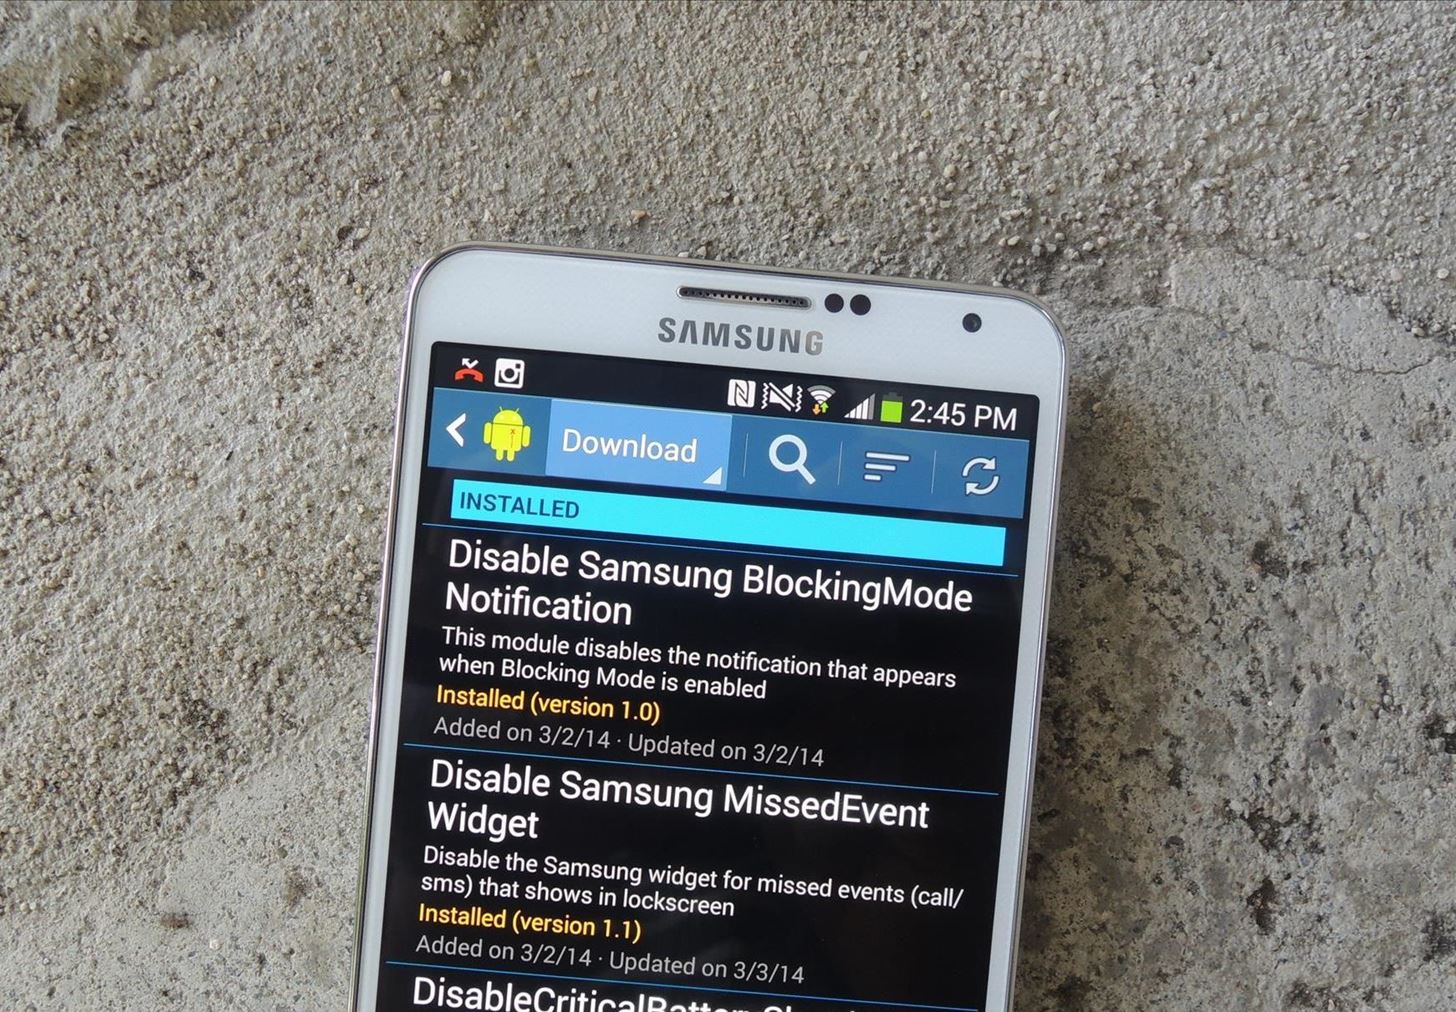 How to Disable the Missed Event Widget & “Blocking Mode On” Notification for the Galaxy Note 3